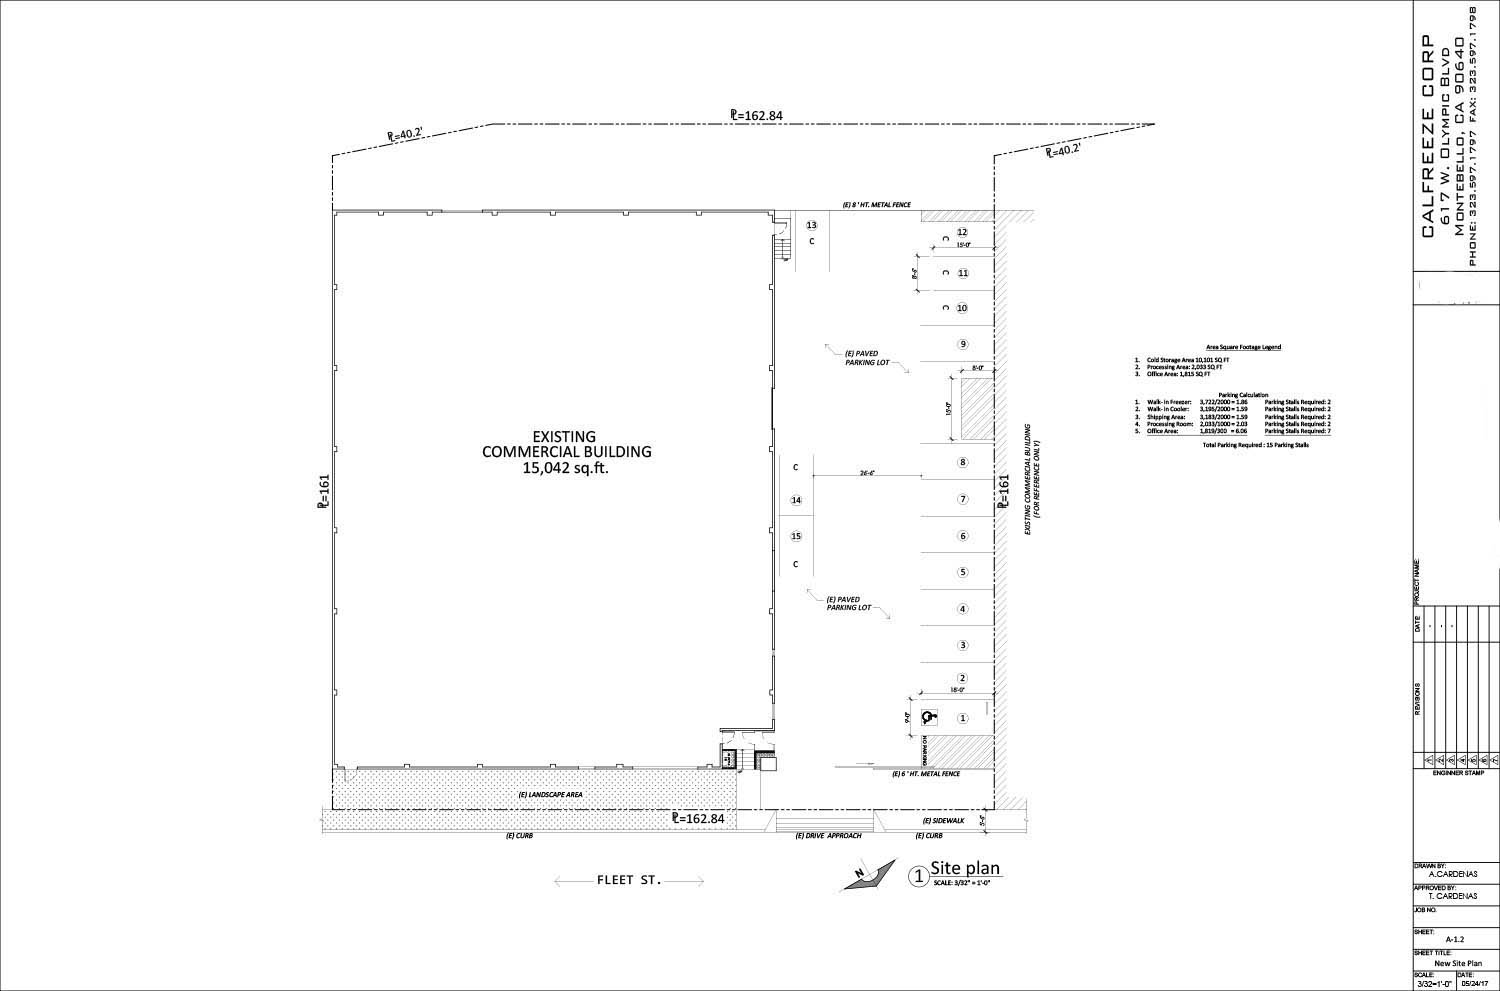 A-1.2_Cold Storage Construction_new site plan.jpg